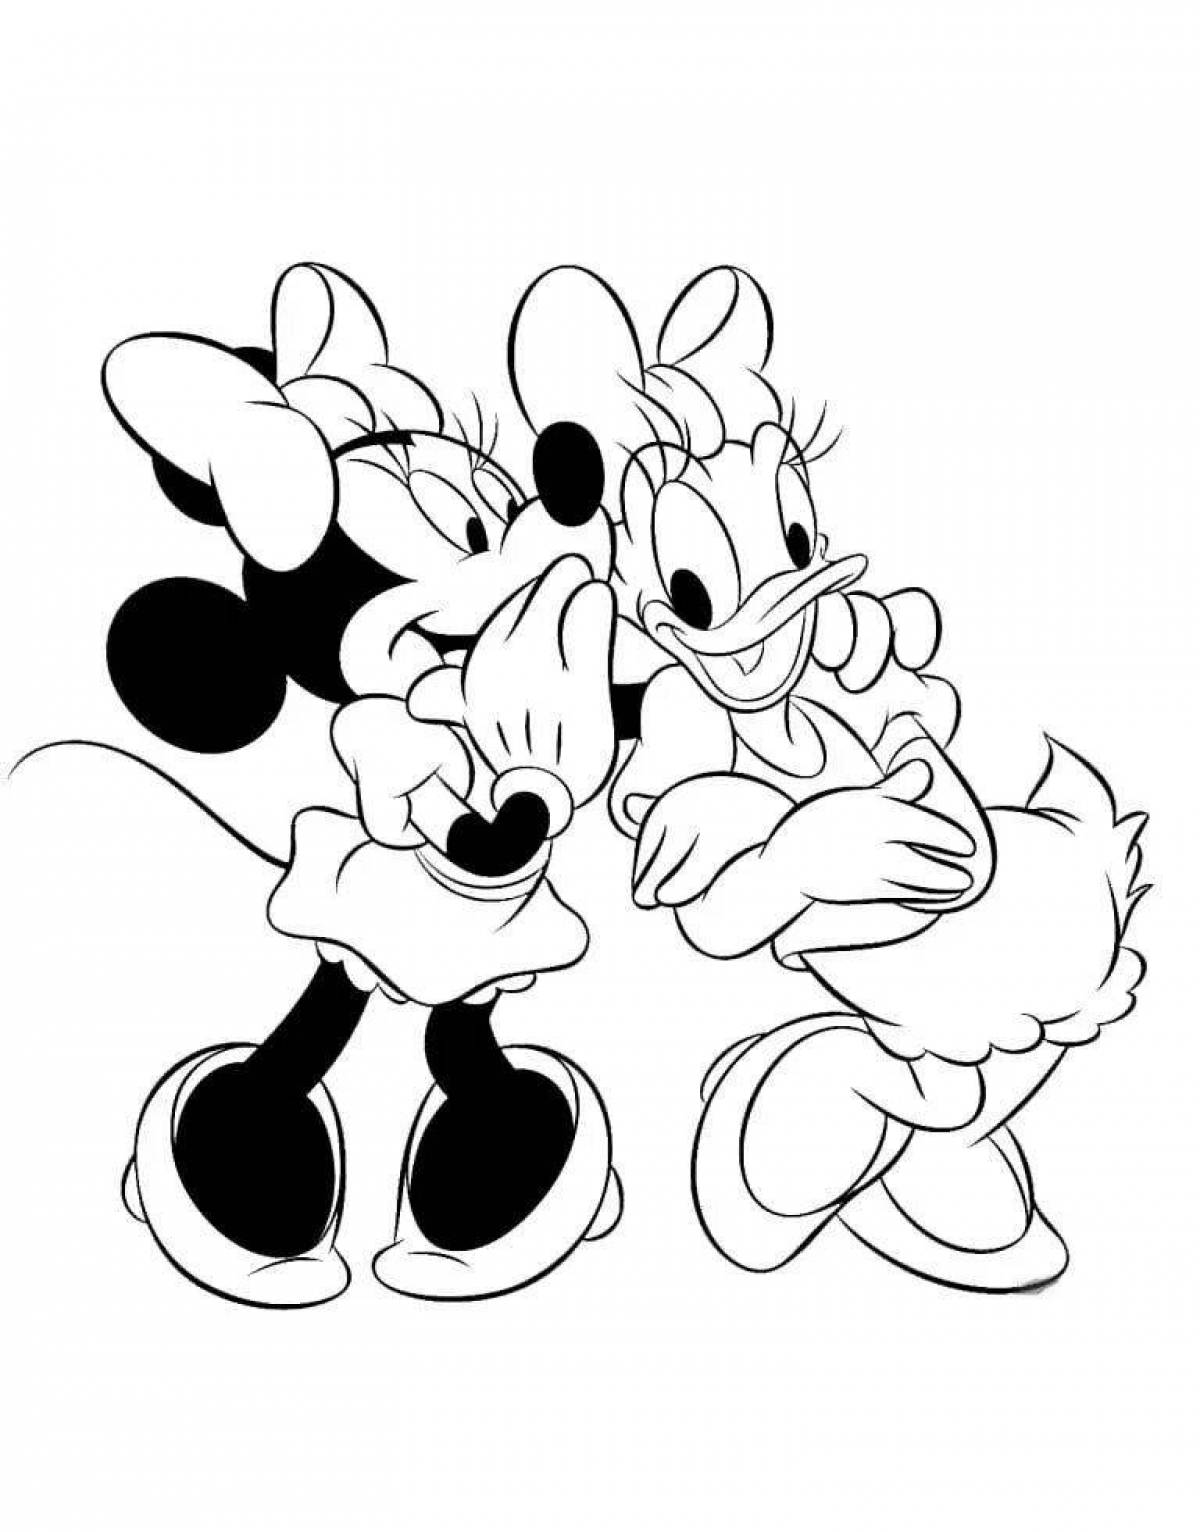 Mickey Mouse and Minnie Mouse #4